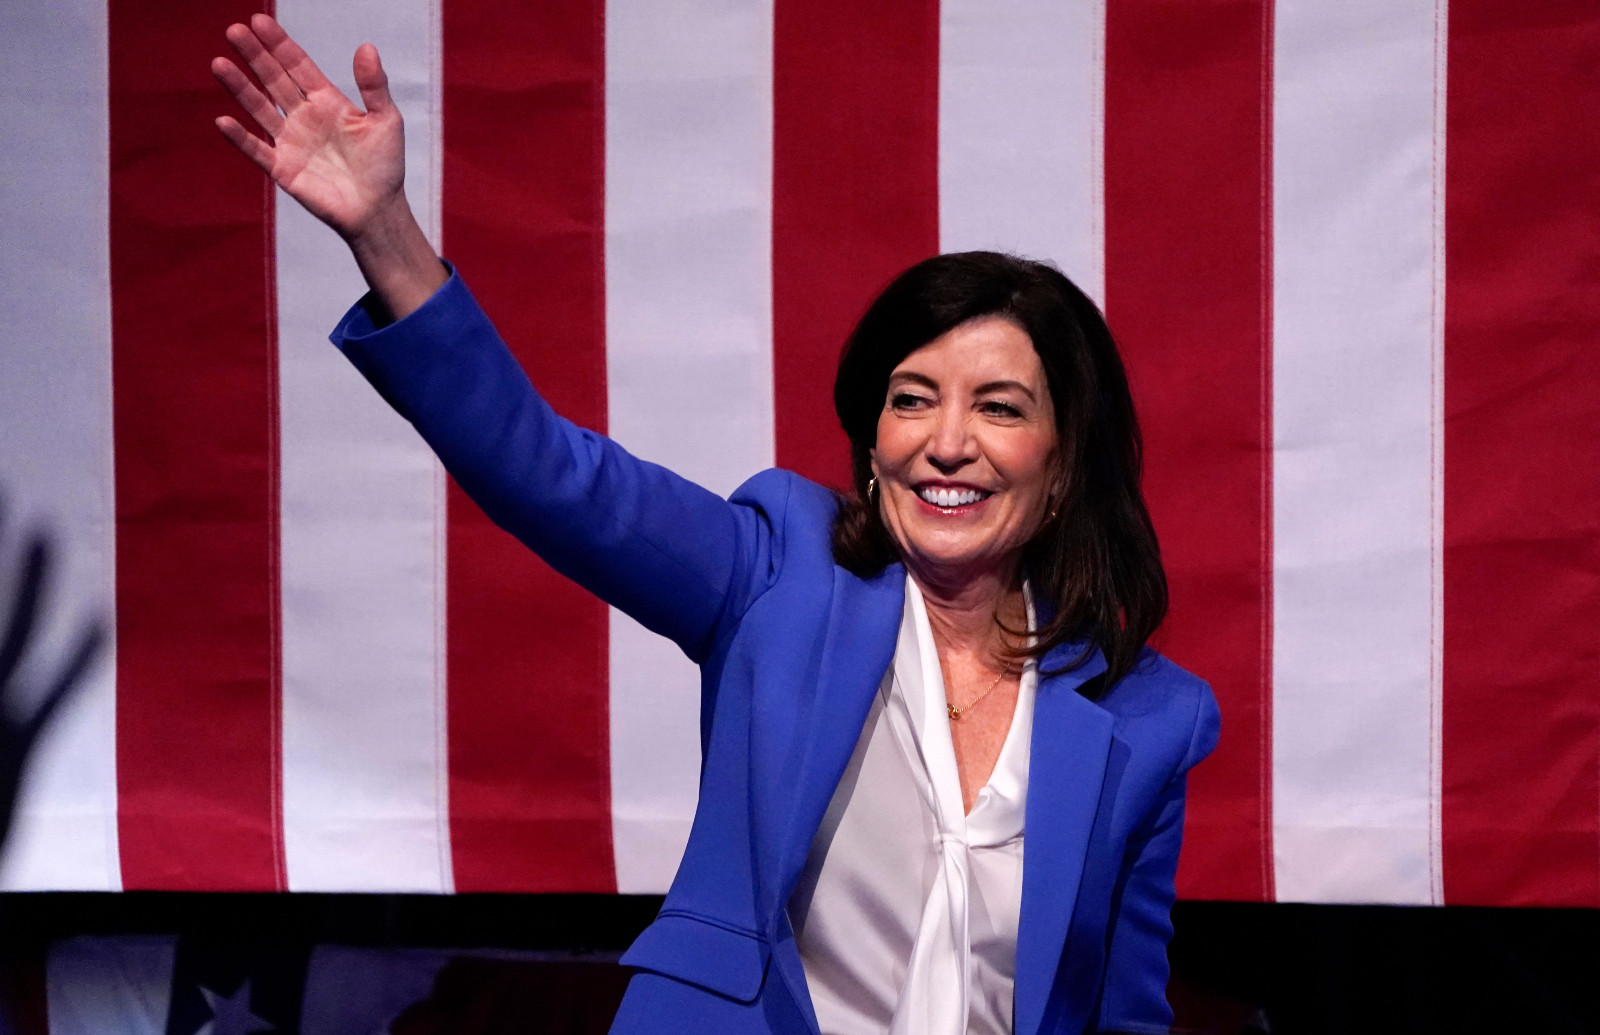 New York State Governor Kathy Hochul waves during an election night event at at the Capitale in New York City on November 8, 2022.